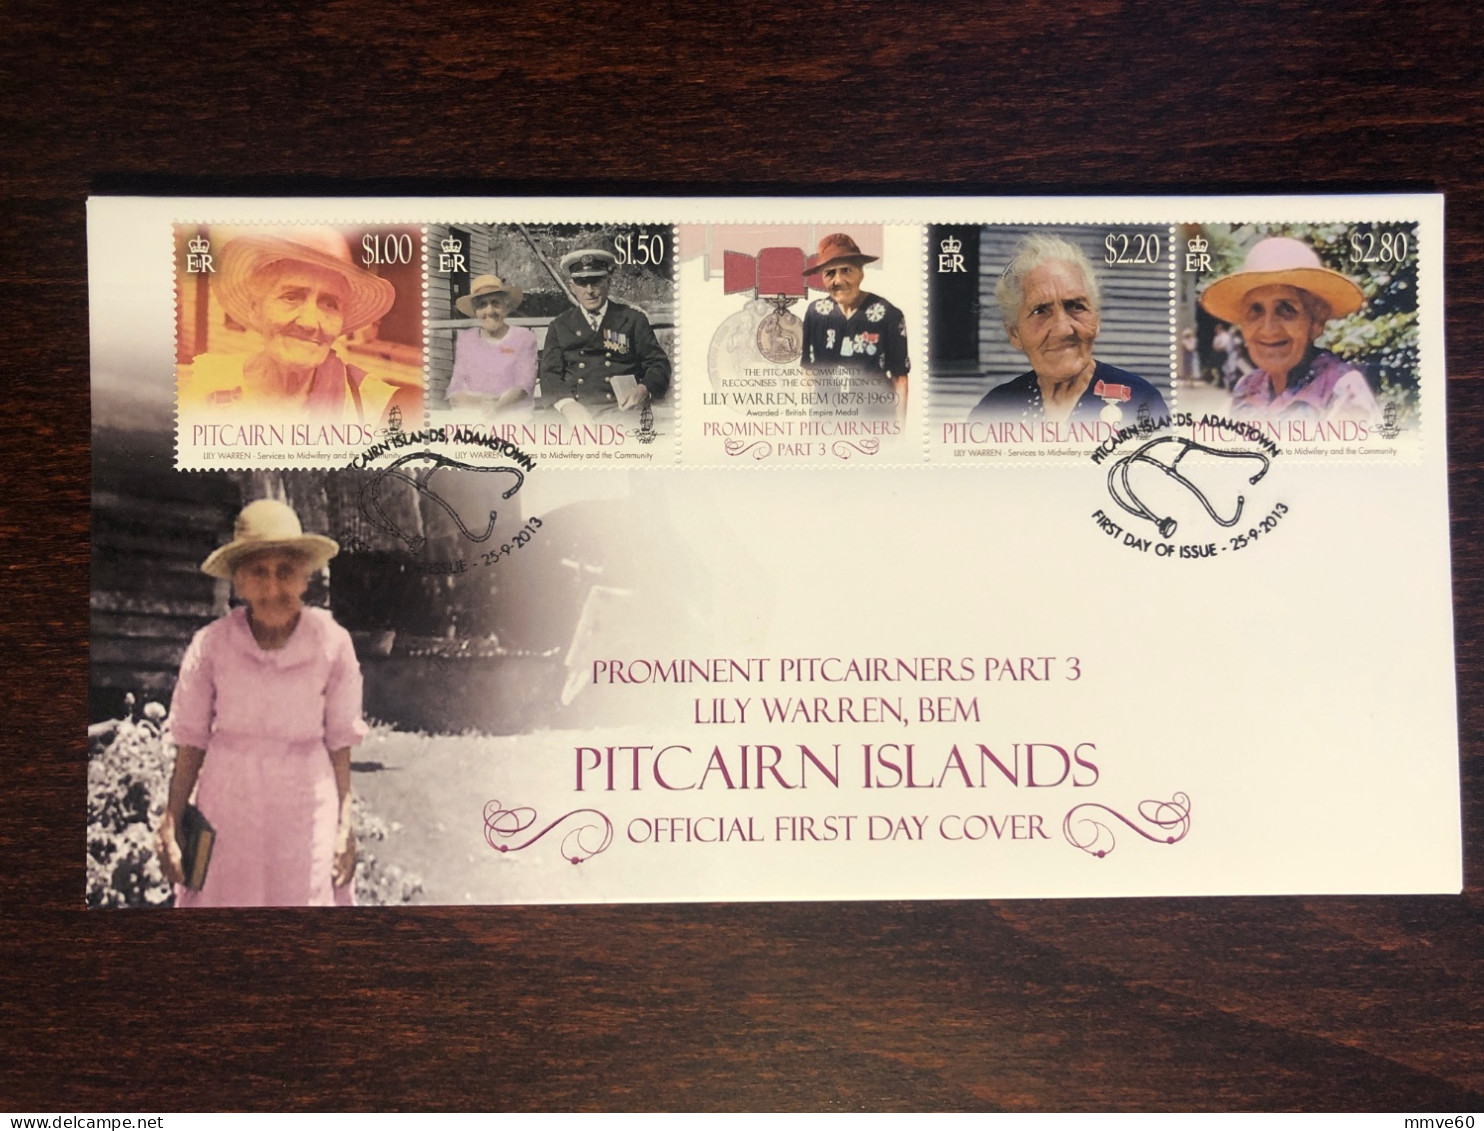 PITCAIRN ISLAND FDC COVER 2013 YEAR RED CROSS MIDWIVES NURSE HEALTH MEDICINE STAMPS - Pitcairn Islands